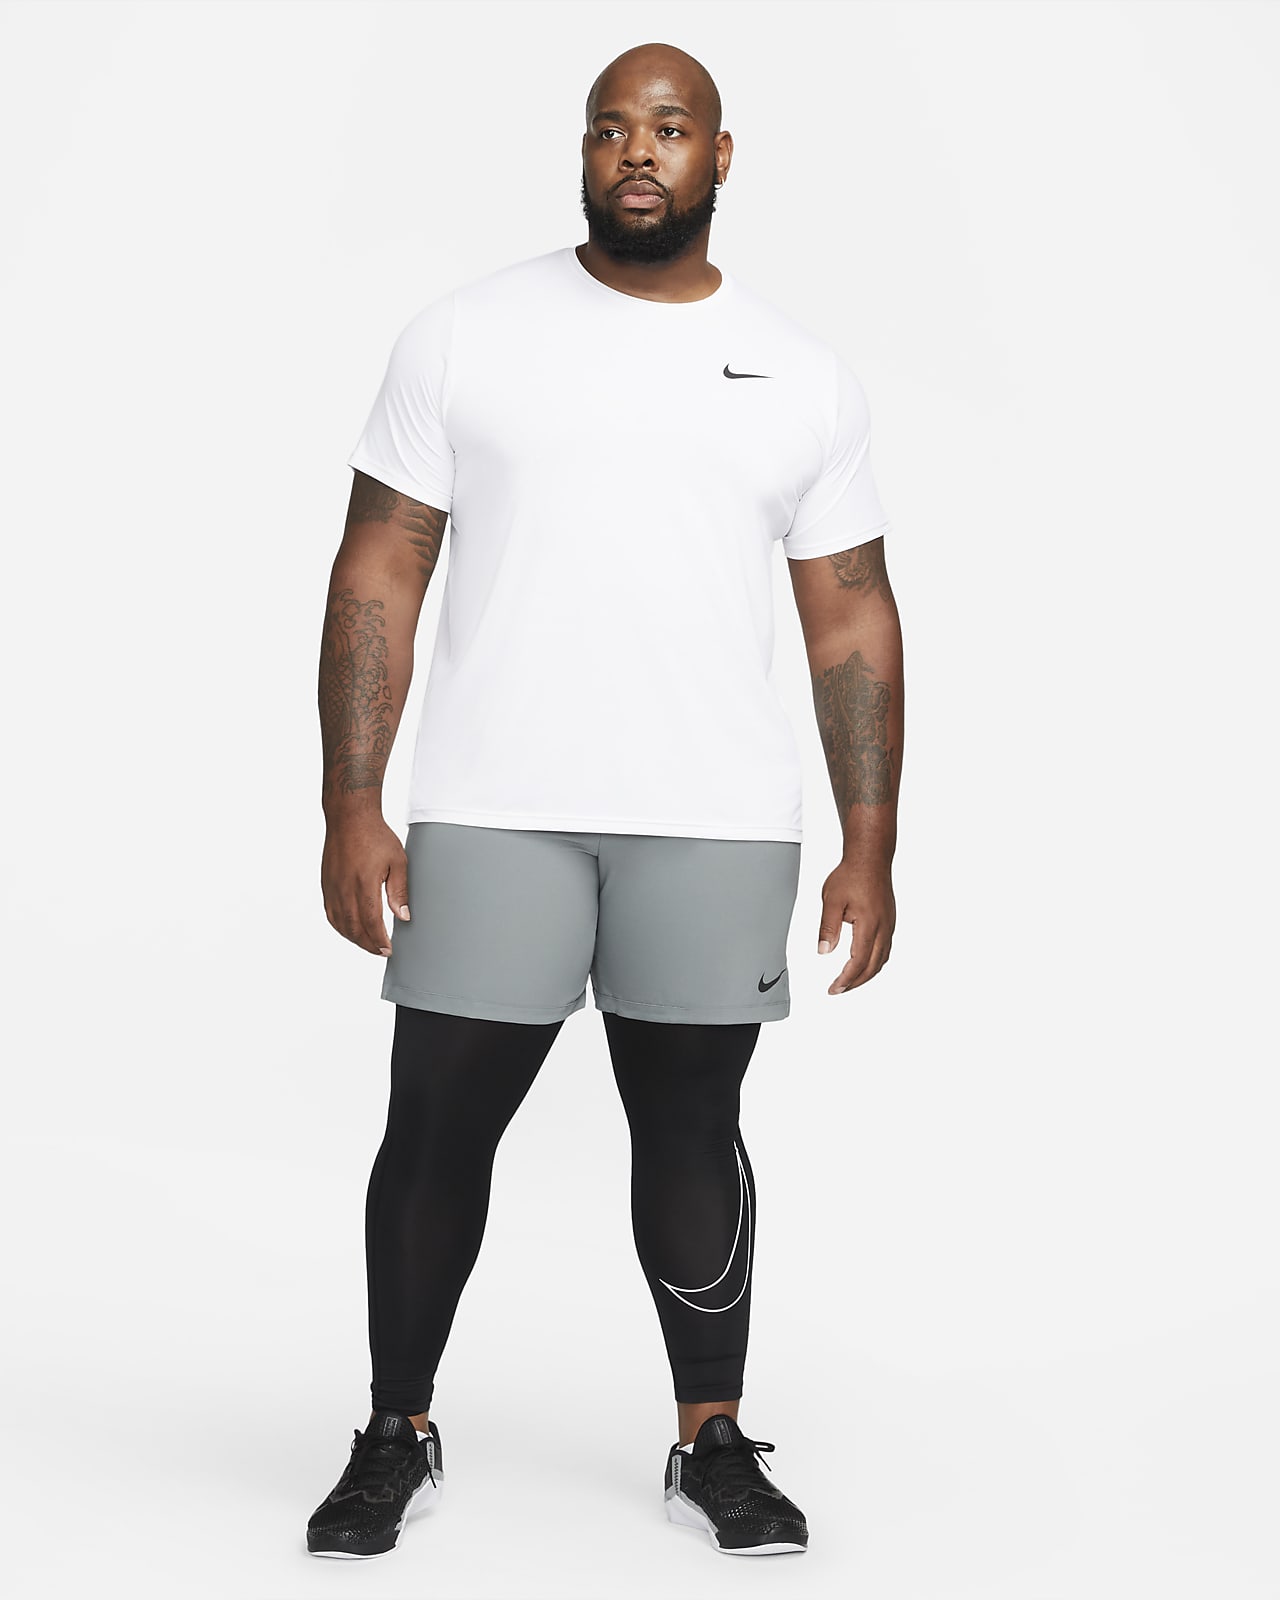 Check out Nike Pro Tights - 889561-071 - by Nike in